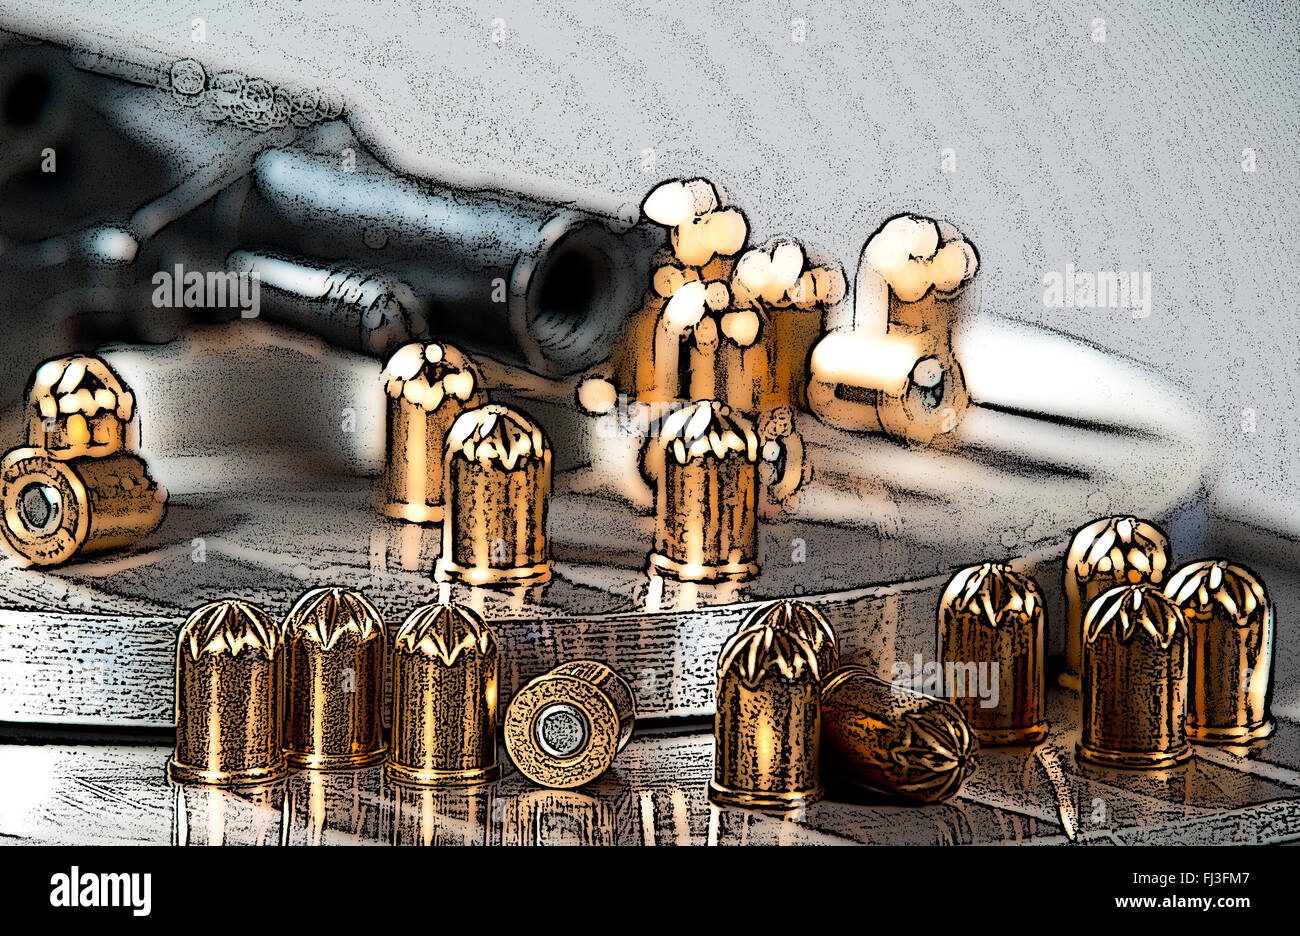 illustrationl of a revolver with blank cartridges Stock Photo